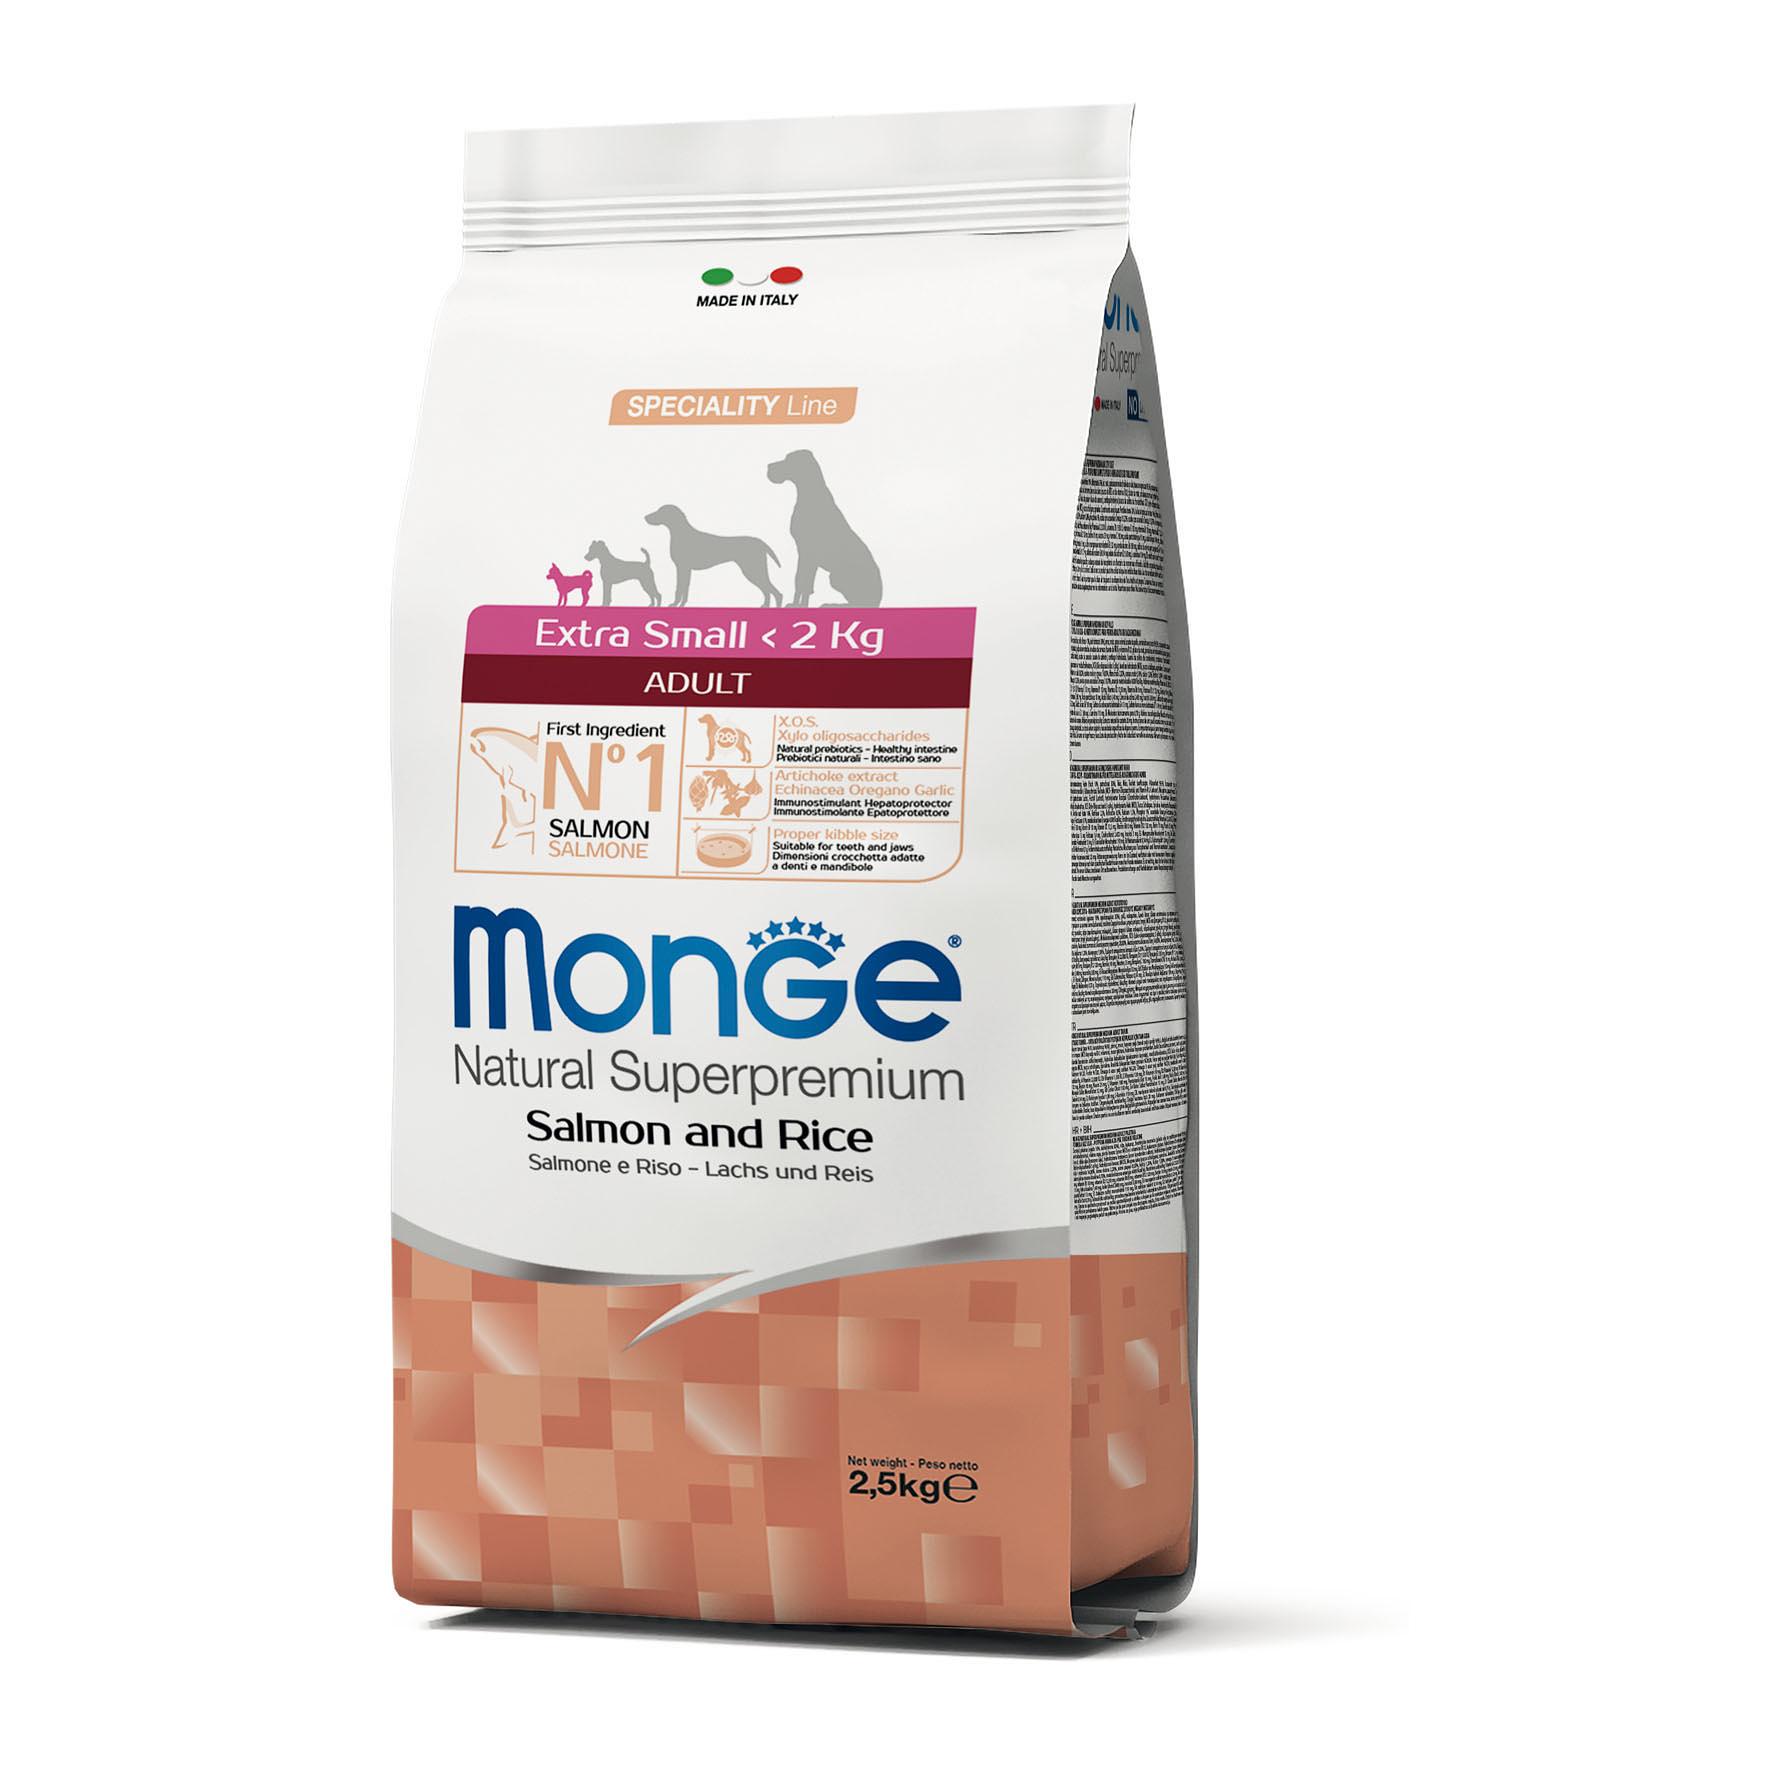 Monge Speciality Line – Extra Small Adult, saumon